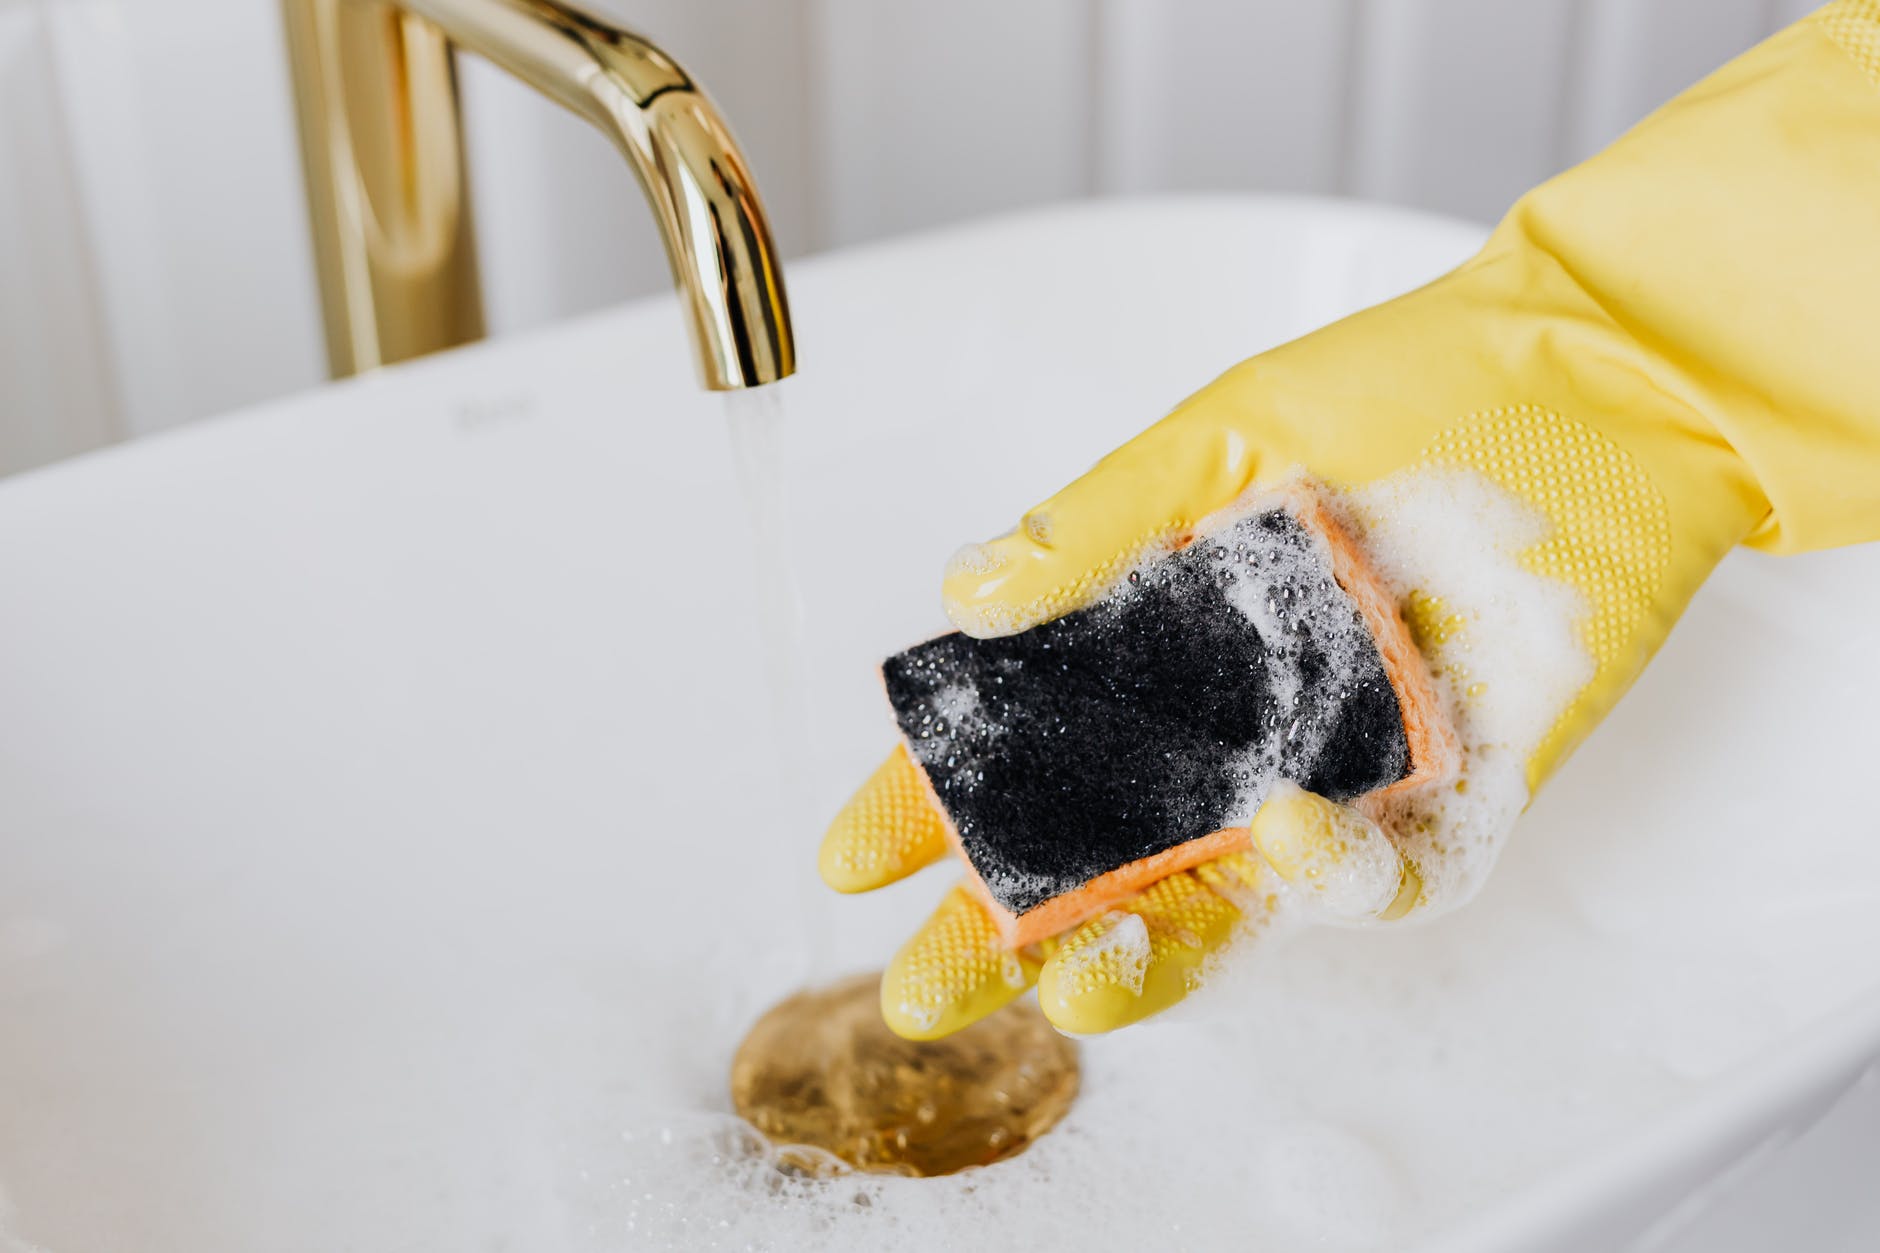 person in glove using detergent and sponge while cleaning sink